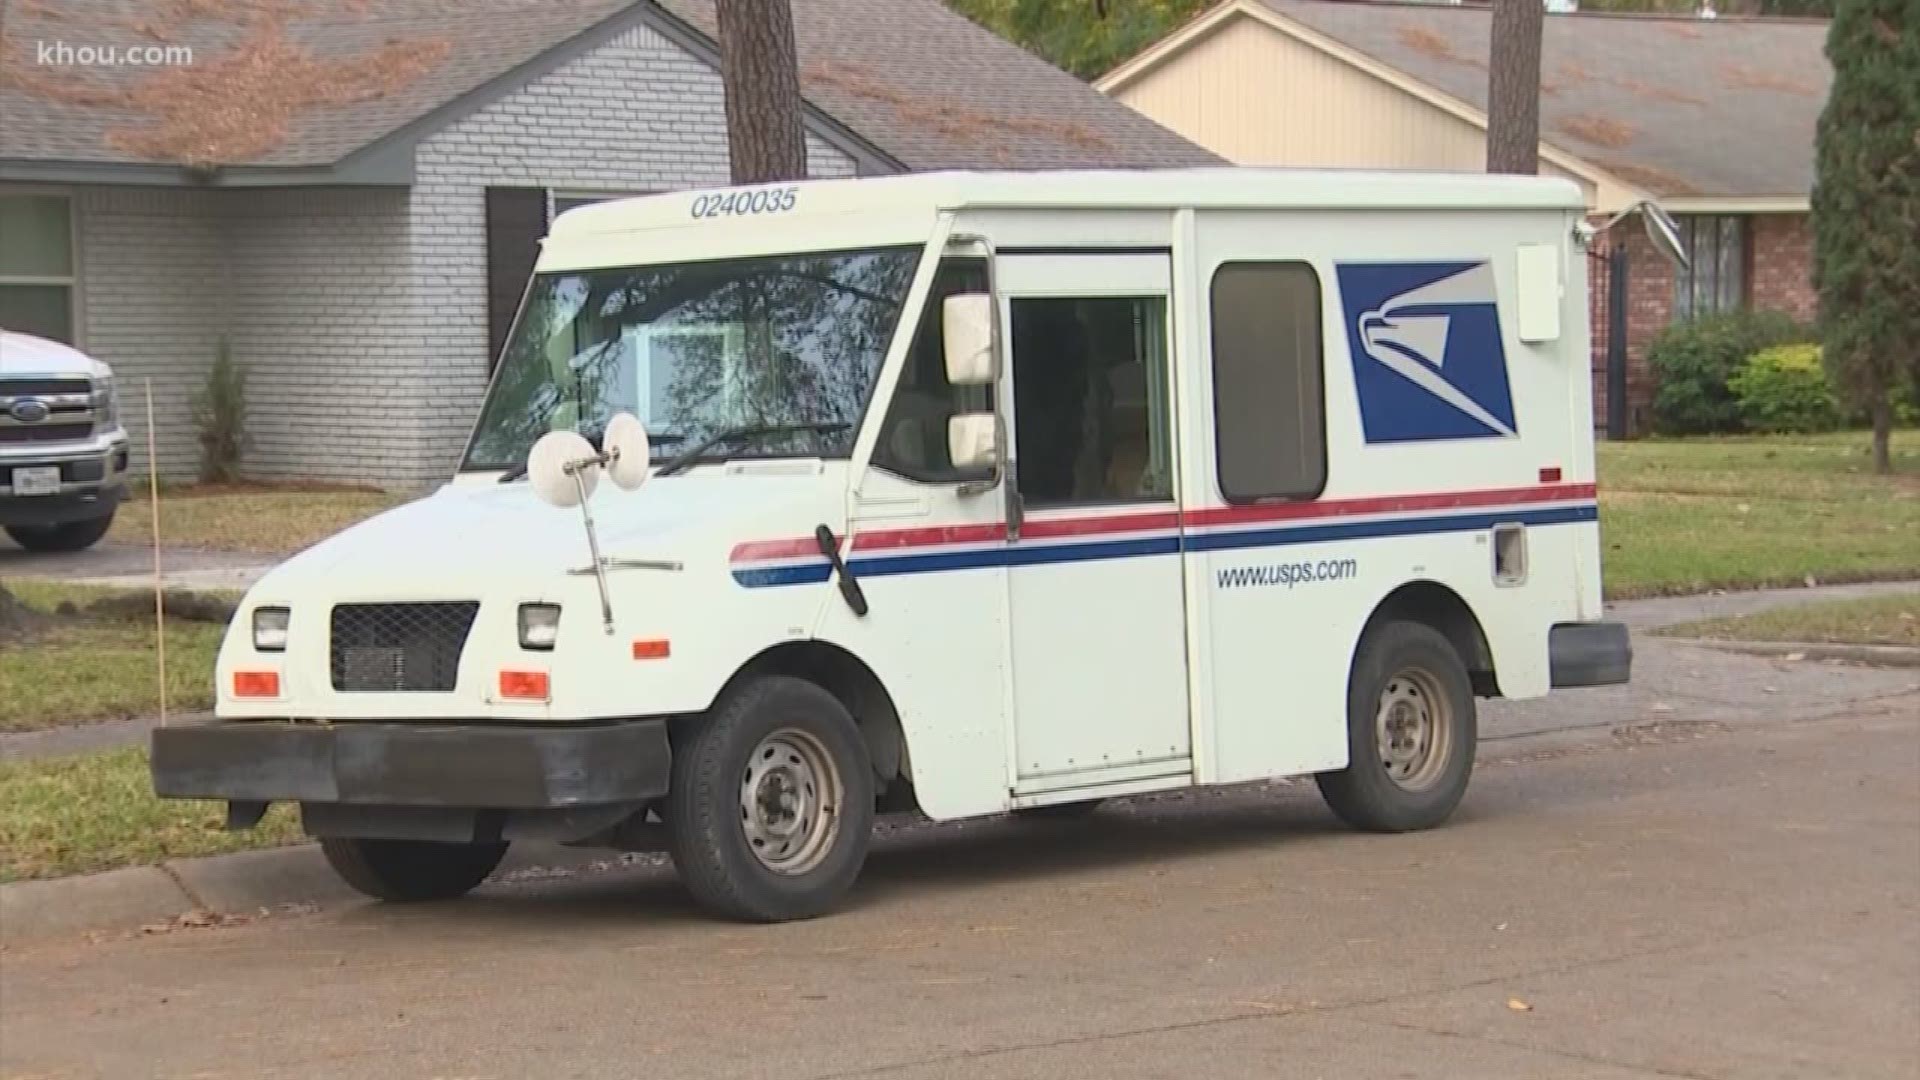 Adrian Jackson is in “pretty good spirits,” according to the head of the National Association of Letter Carriers, Branch 283, which includes Houston.